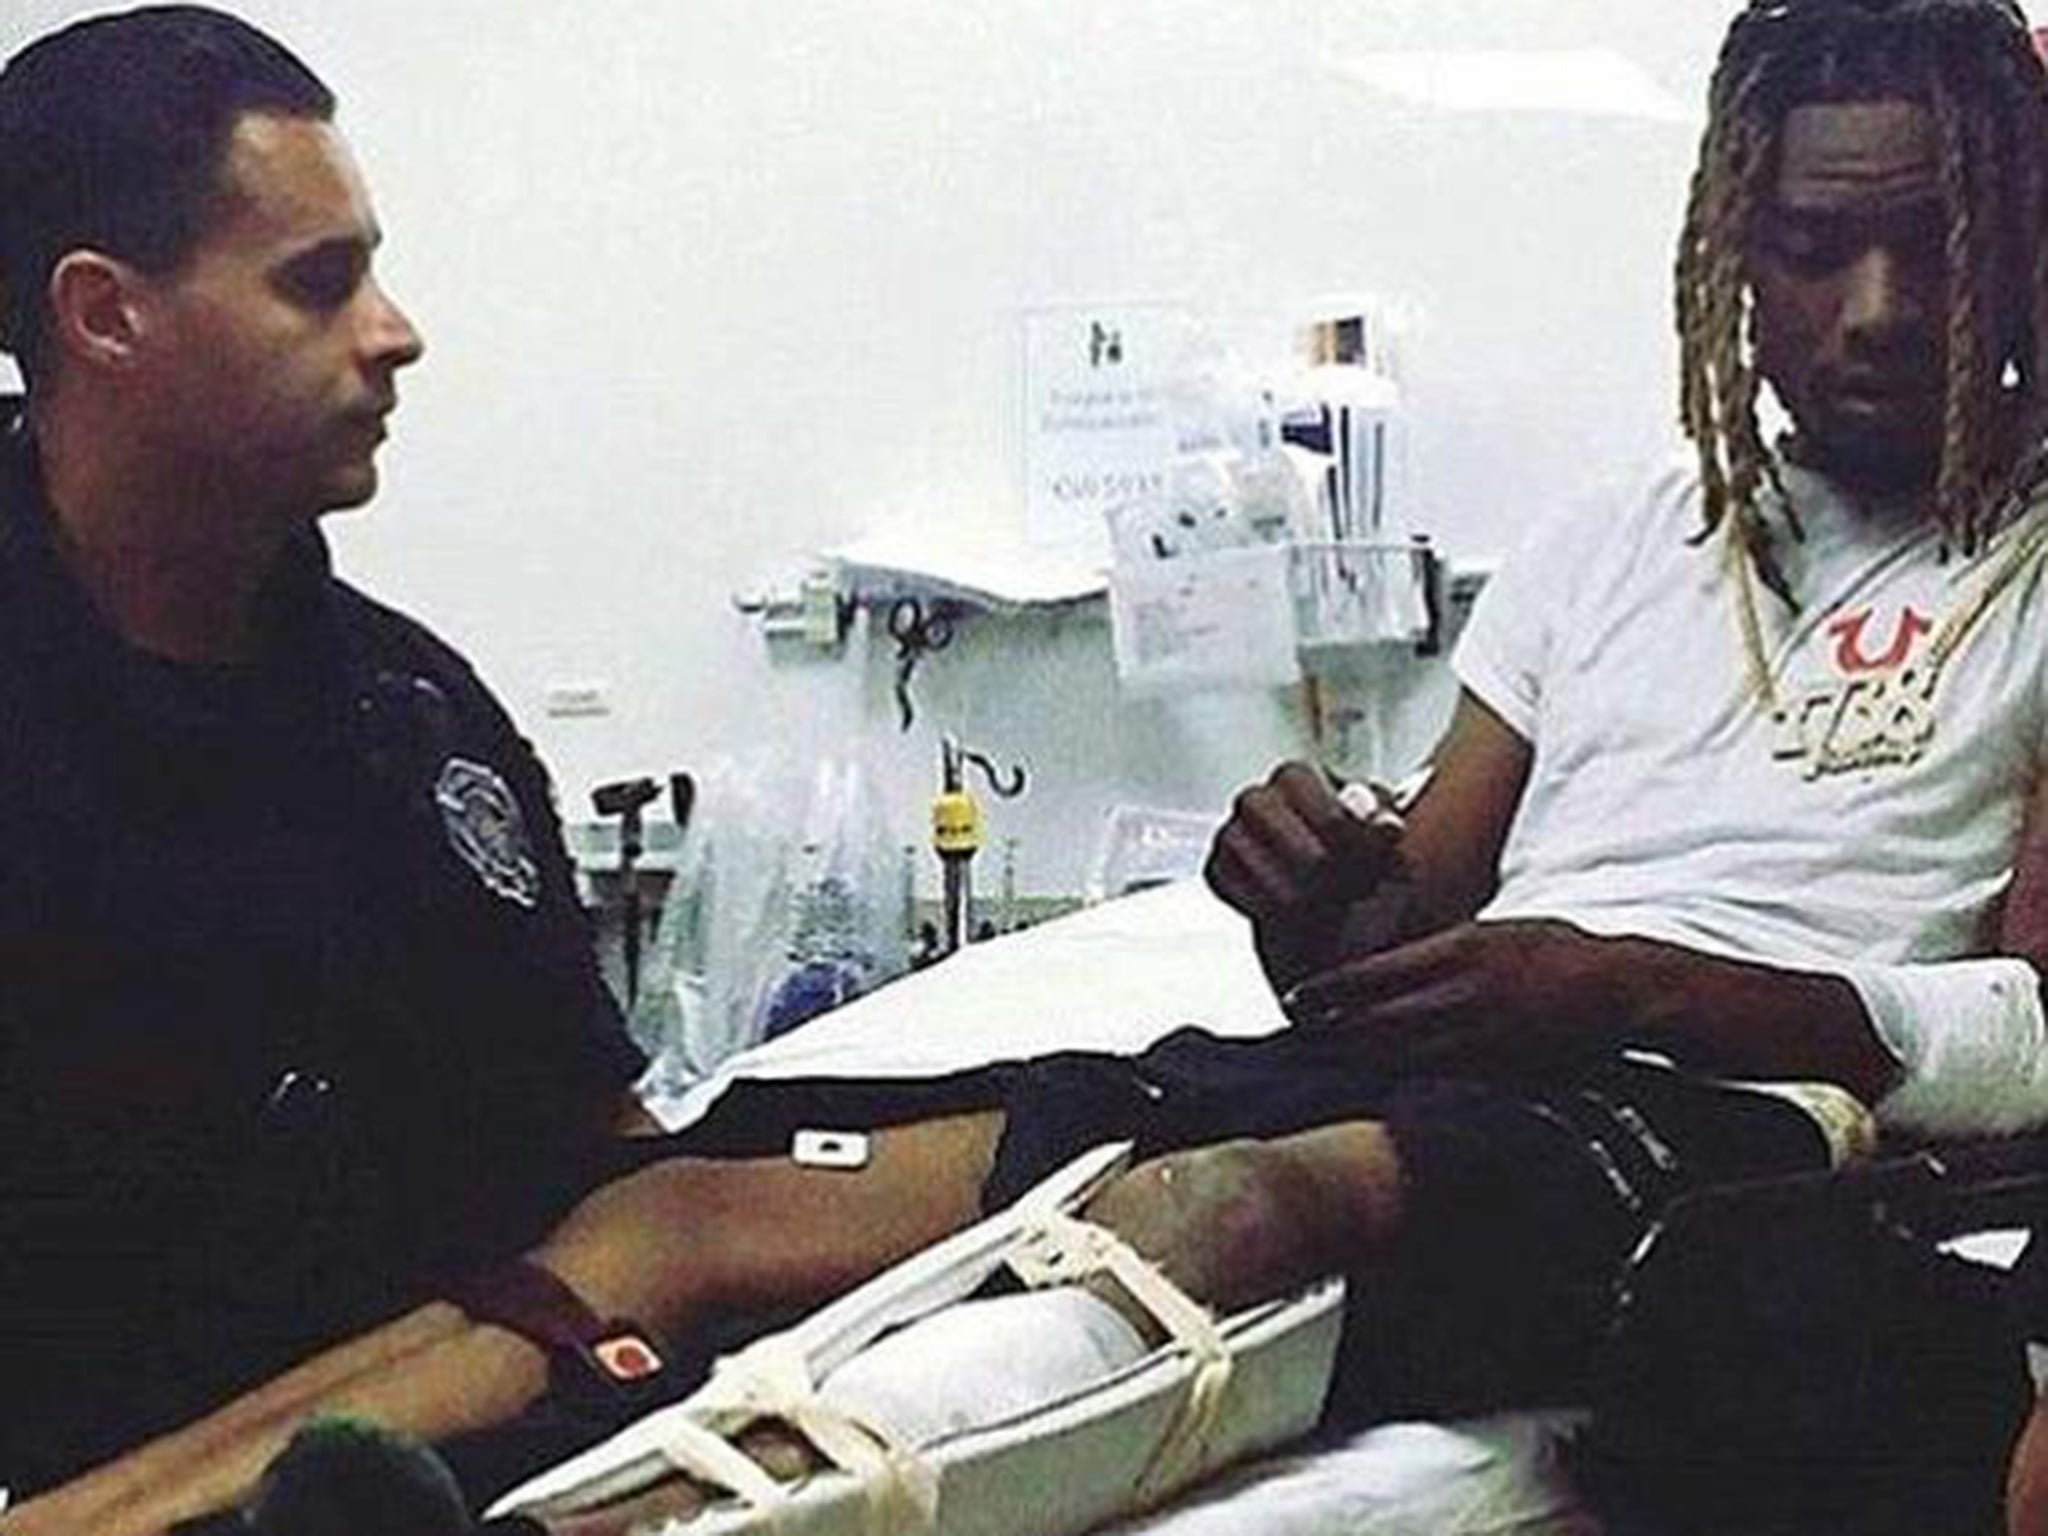 Fetty Wap pictured in hospital following the road traffic accident